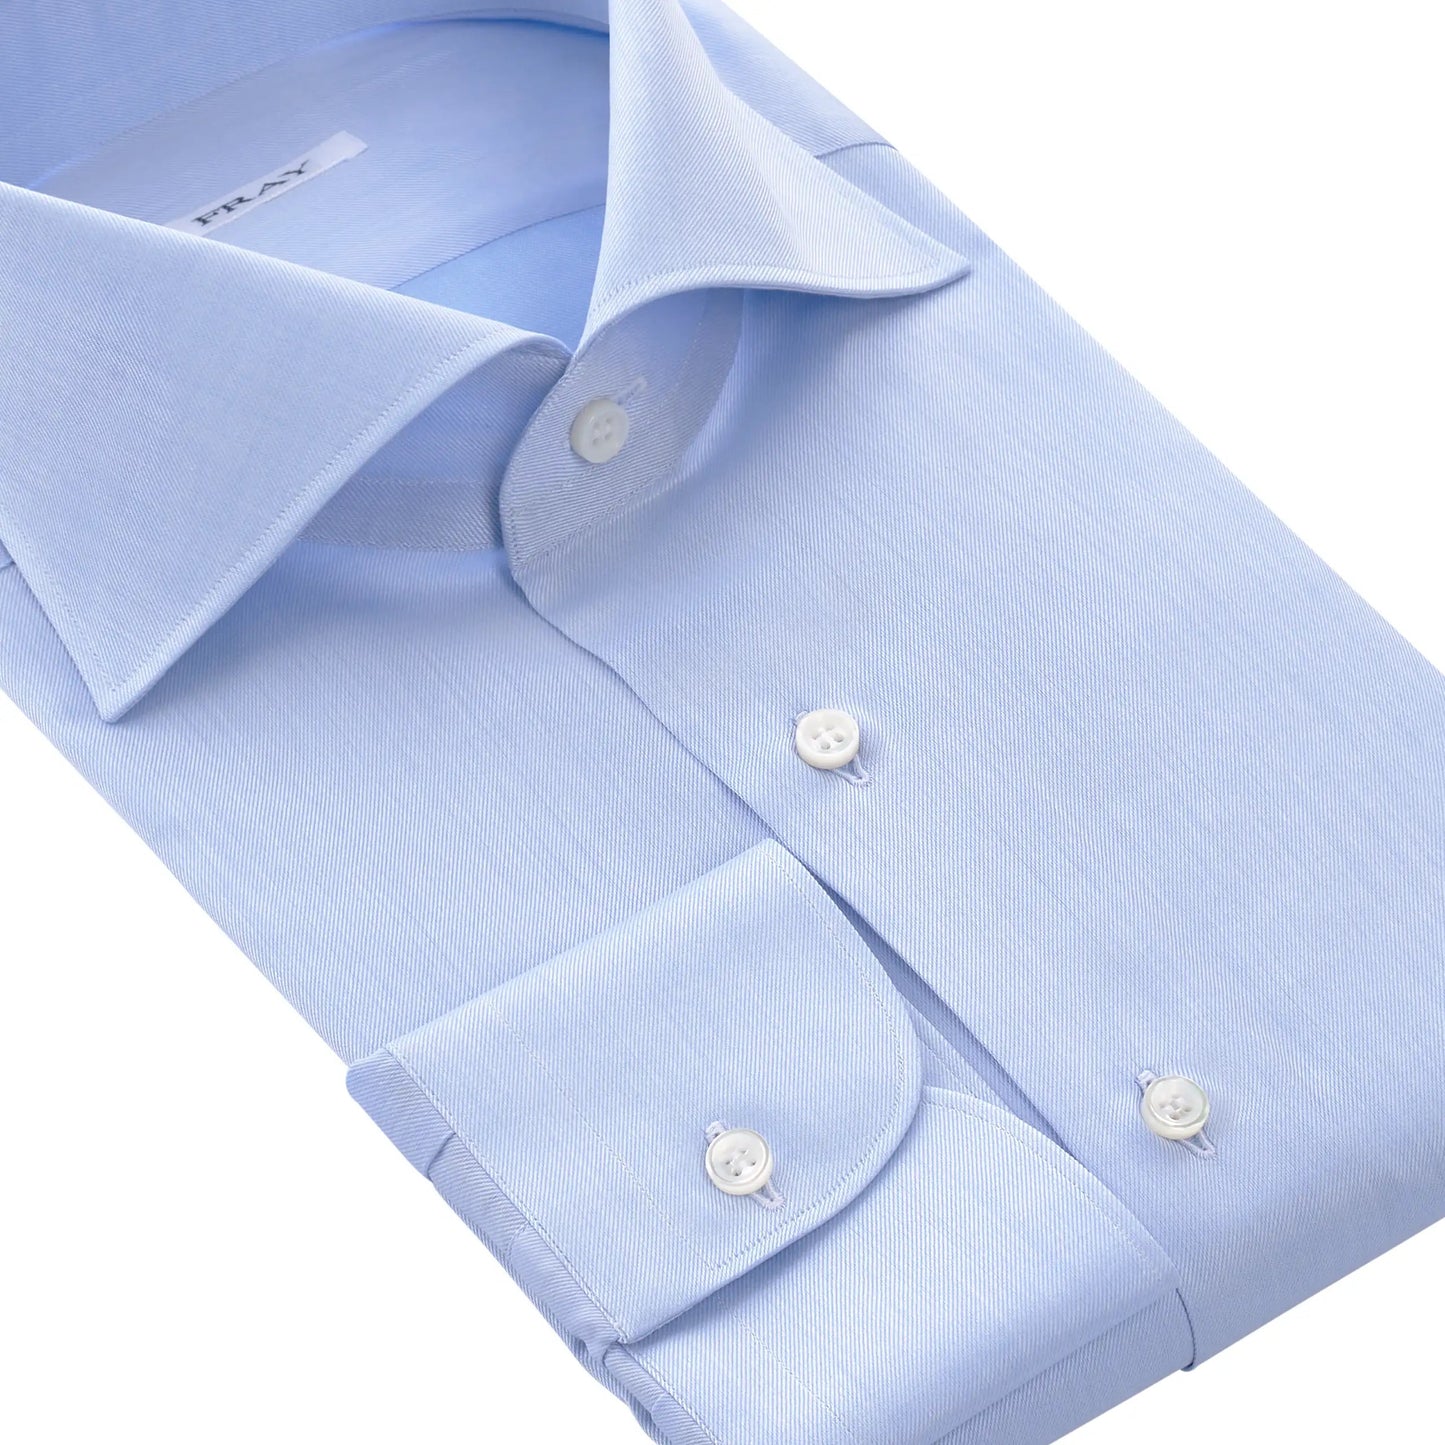 Fray Classic Light Blue Shirt with Round Cuff - SARTALE